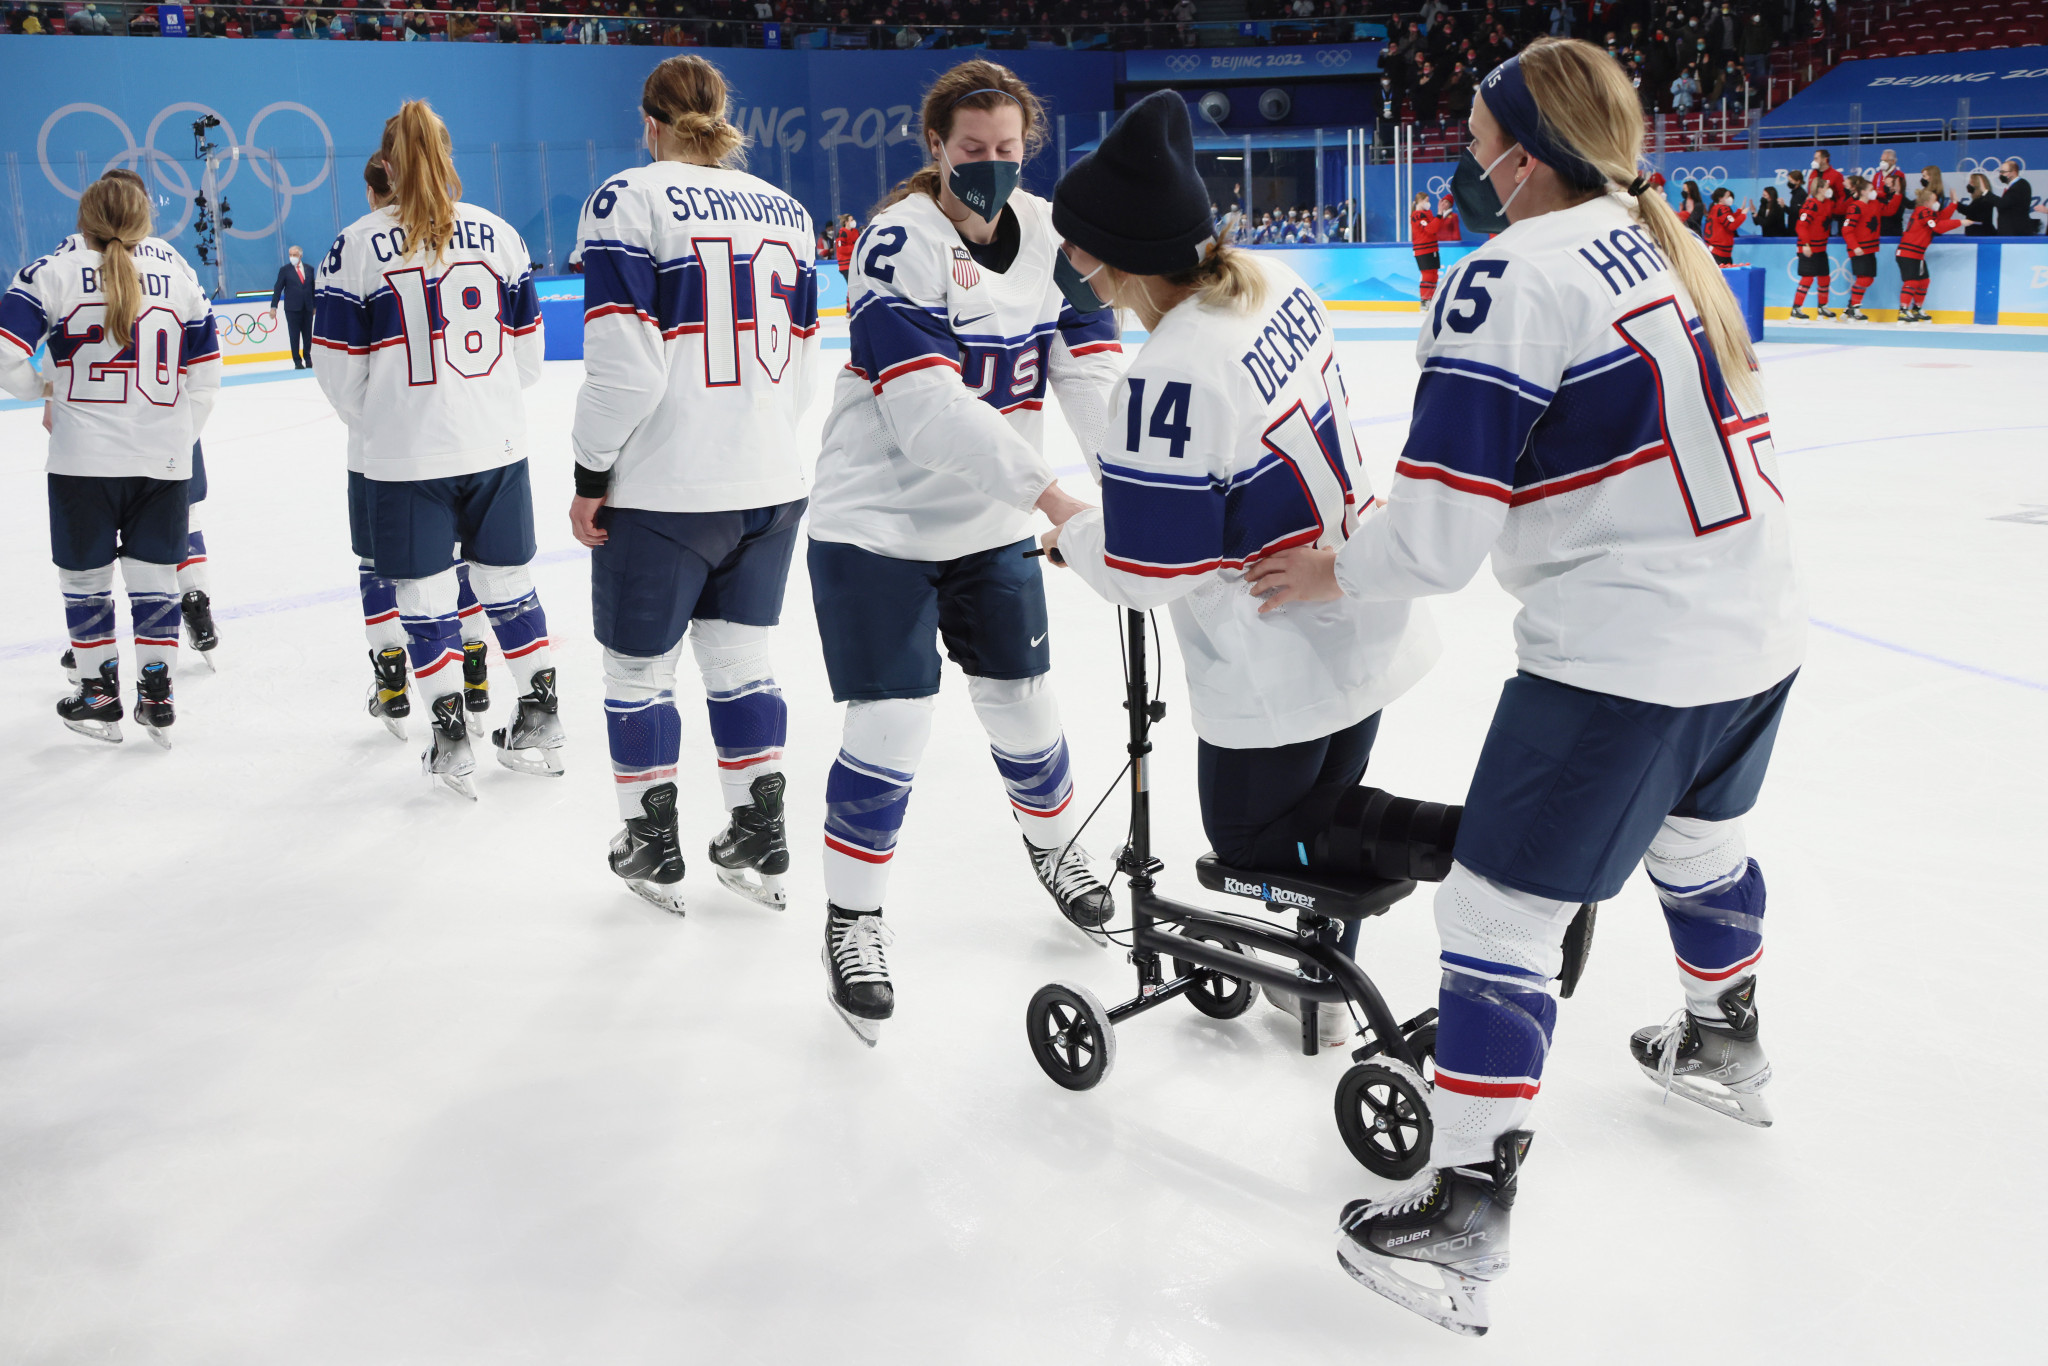 Brianna Decker needed assistance to attend the medal ceremony at 2022 Beijing Winter Olympics after her injuries during a preliminary match ©Getty Images